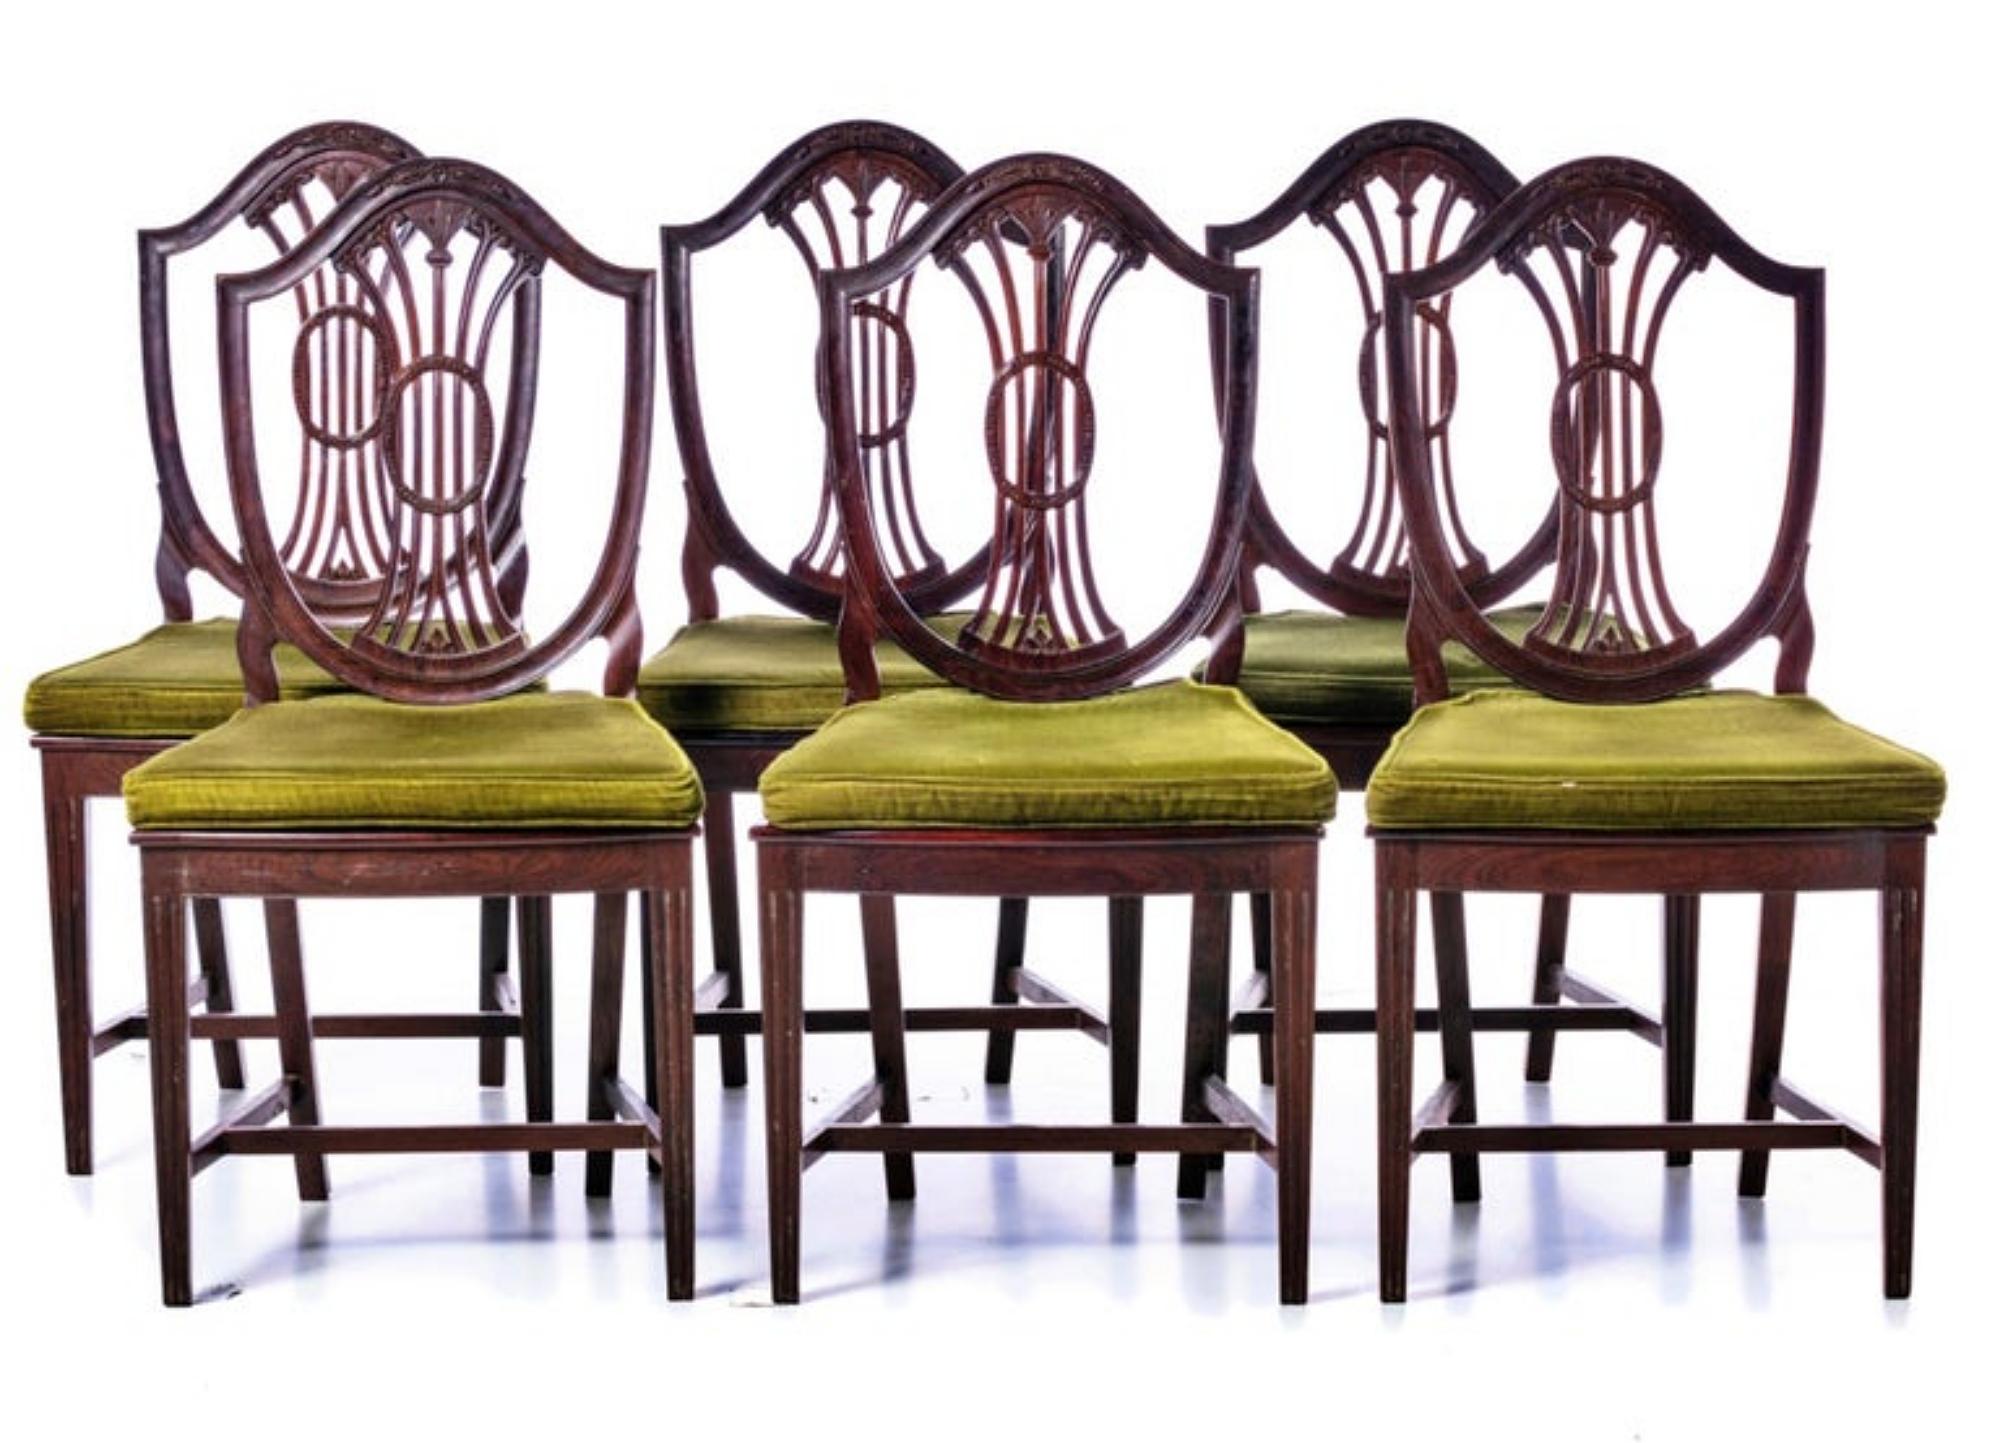 Lot of 6 chairs
Portuguese
19th century
in Brazilian rosewood, cut and pierced table, straw seats.
Dimensions: 99 x 50 x 40 cm.